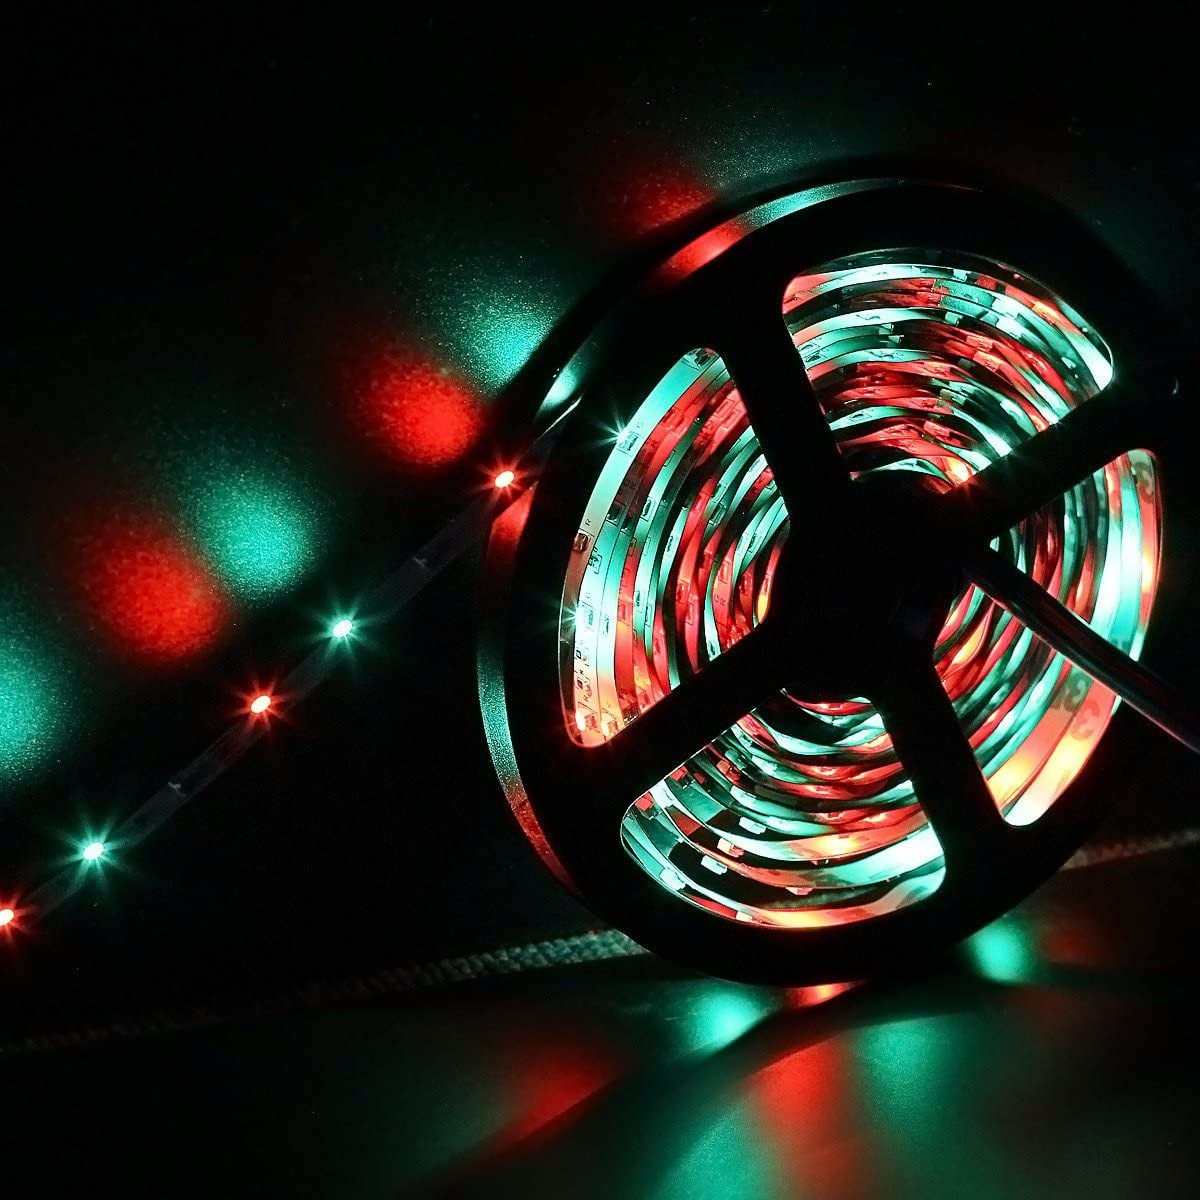 LED Strip Light With Remote Control 12V Flexible Tape Led Ribbon Neon Lamp TV BackLight 2835 Led Strips for Christmas Party Bedroom Living Room Decoration